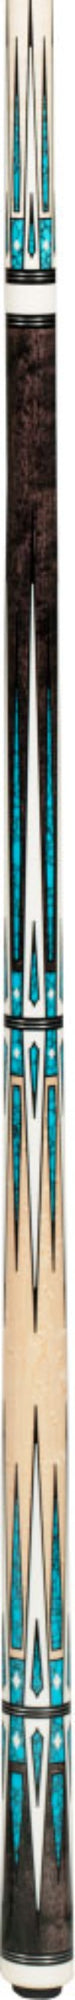 Pechauer Pechauer PL-24 Limited Edition Pool Cue Pool Cue